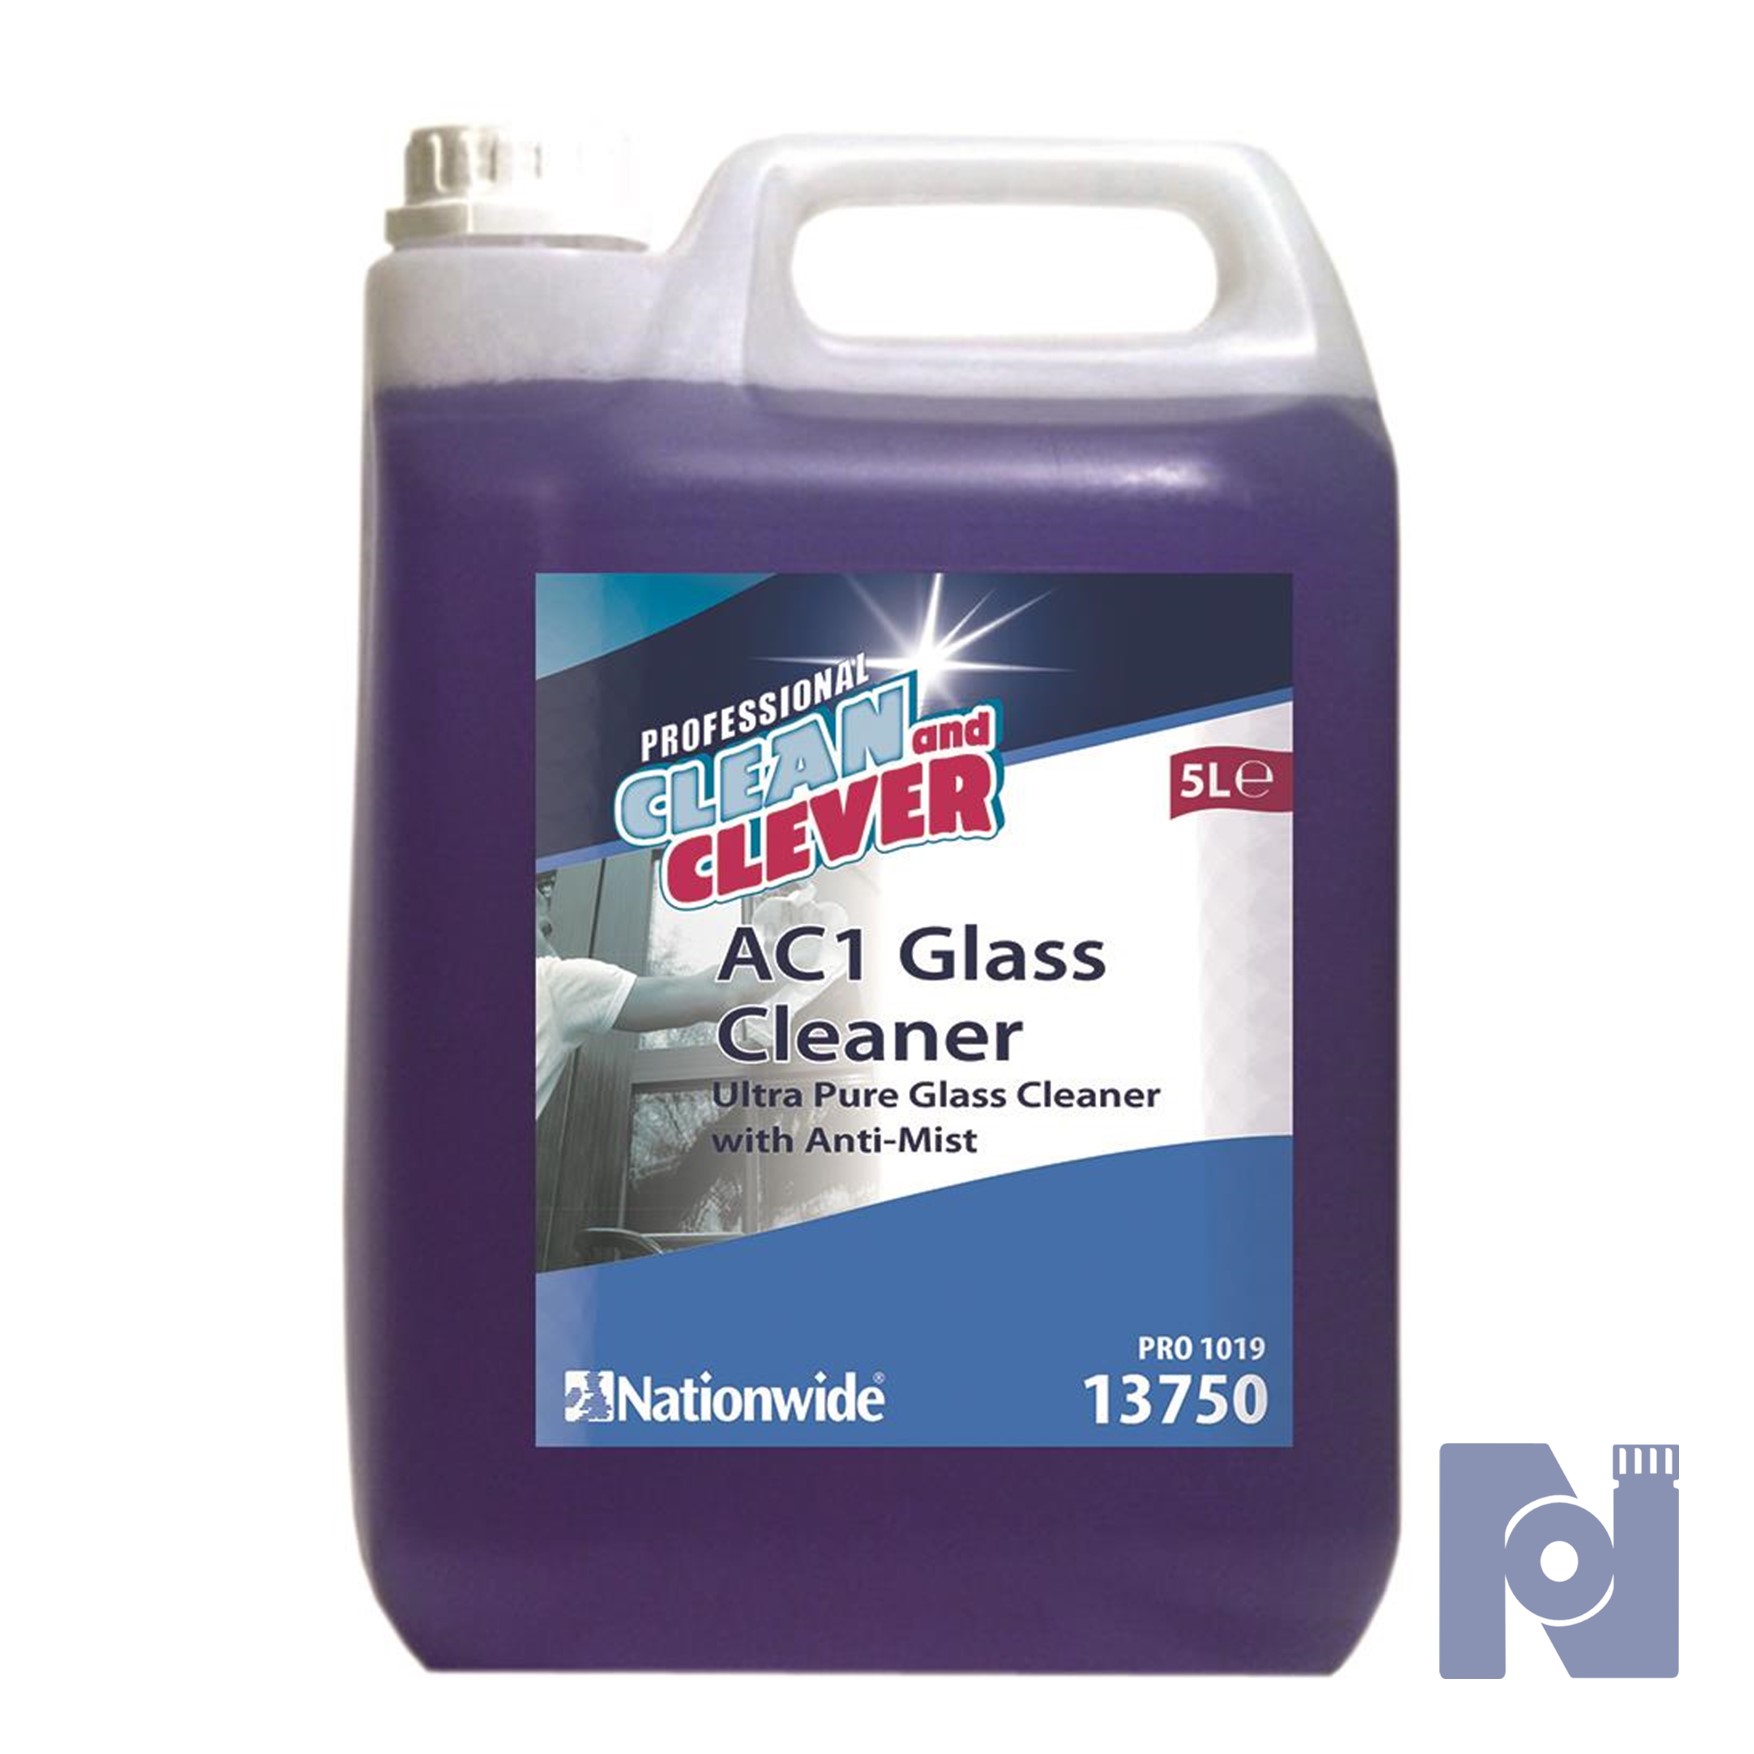 Clean & Clever AC1 Window & Glass Cleaner